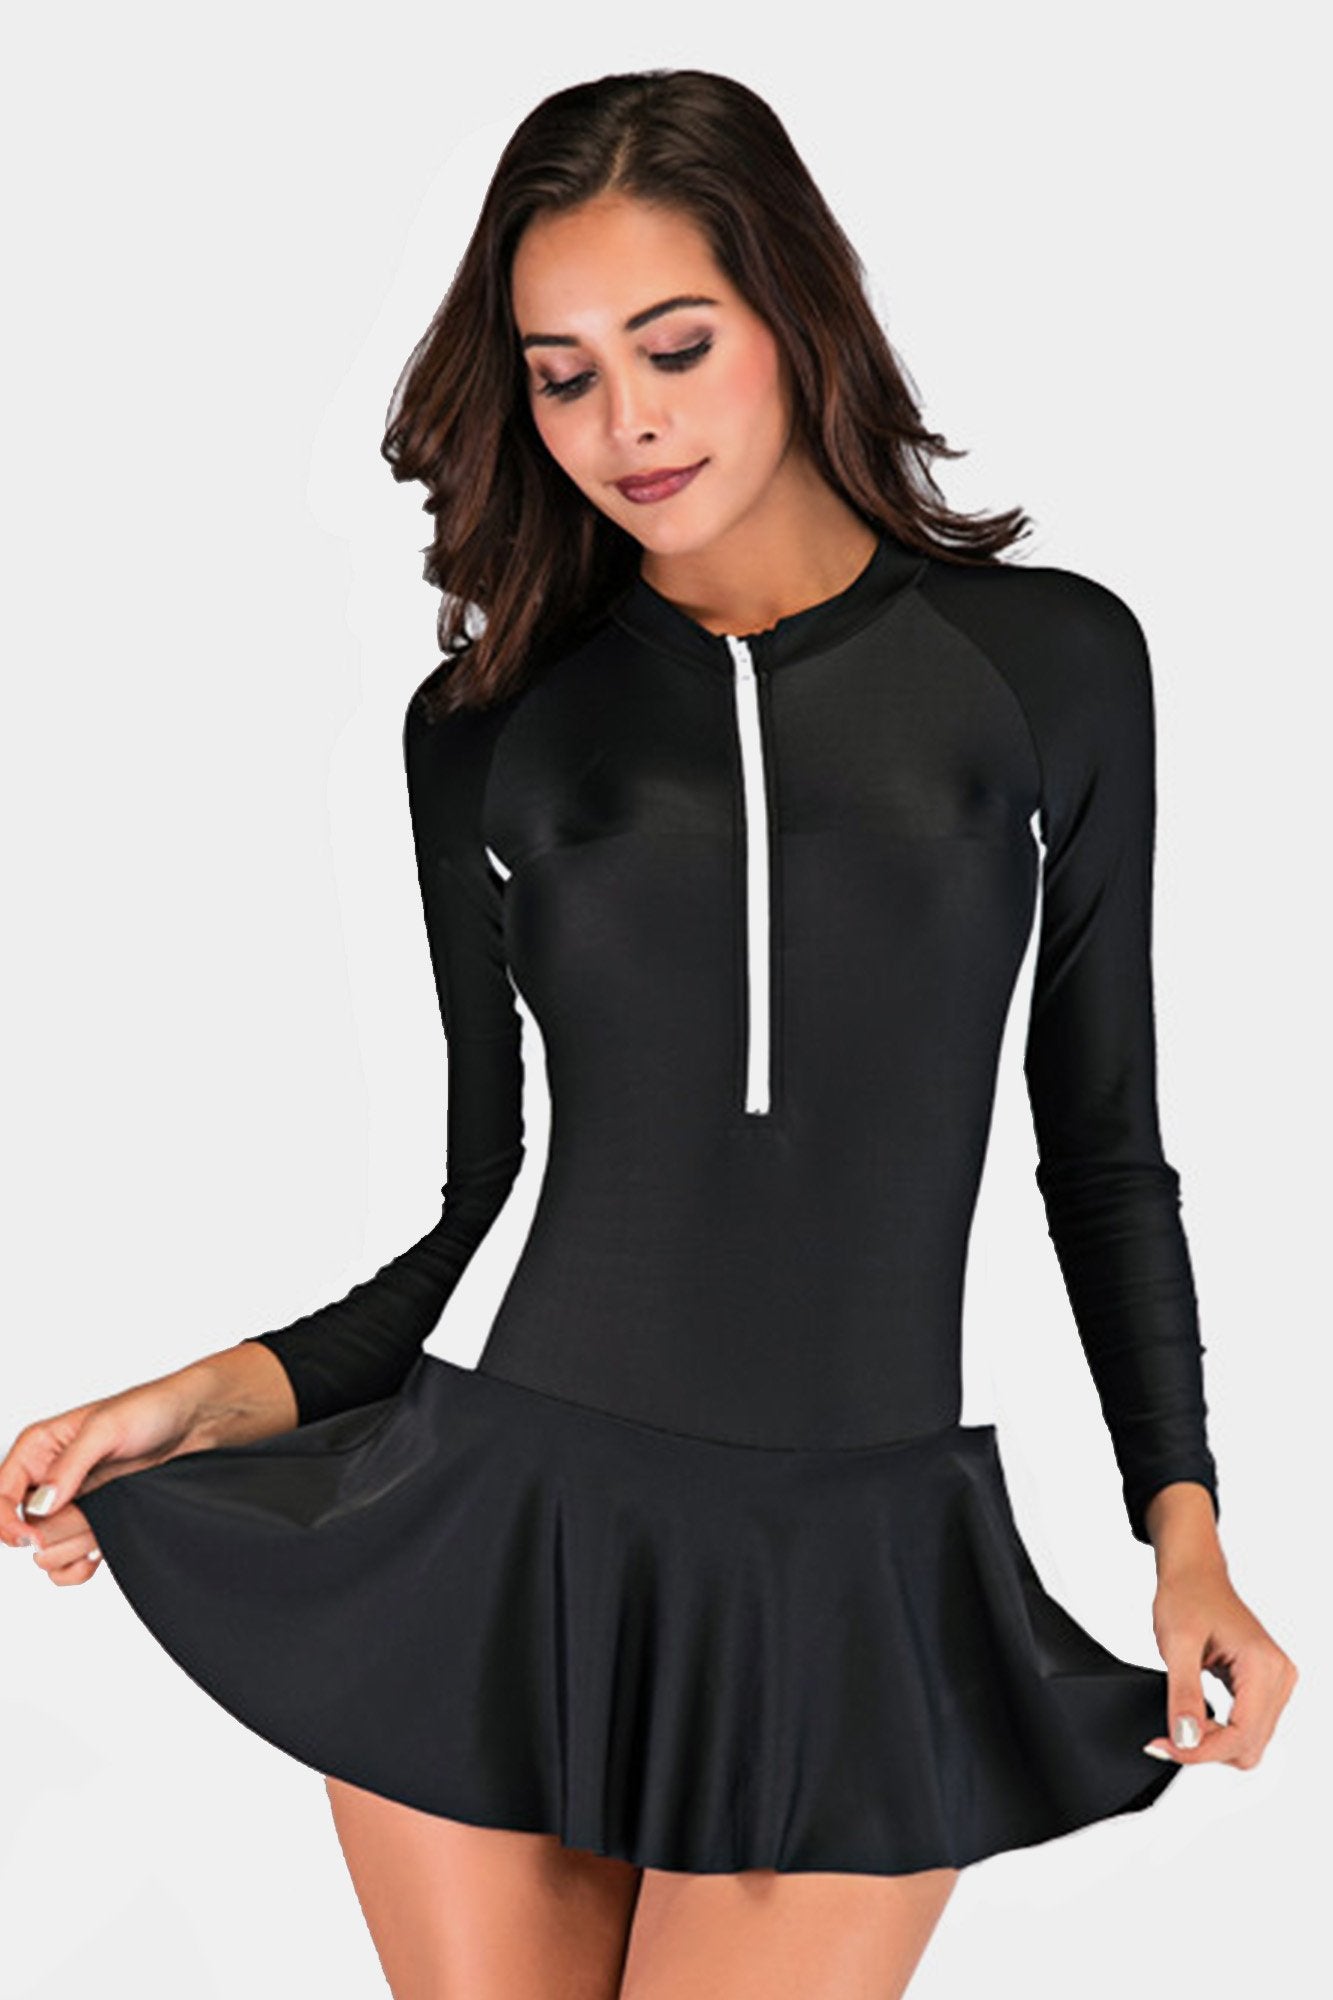 Attraco Skirt One Piece Short Sleeve Wetsuit-Attraco | Fashion Outdoor Clothing